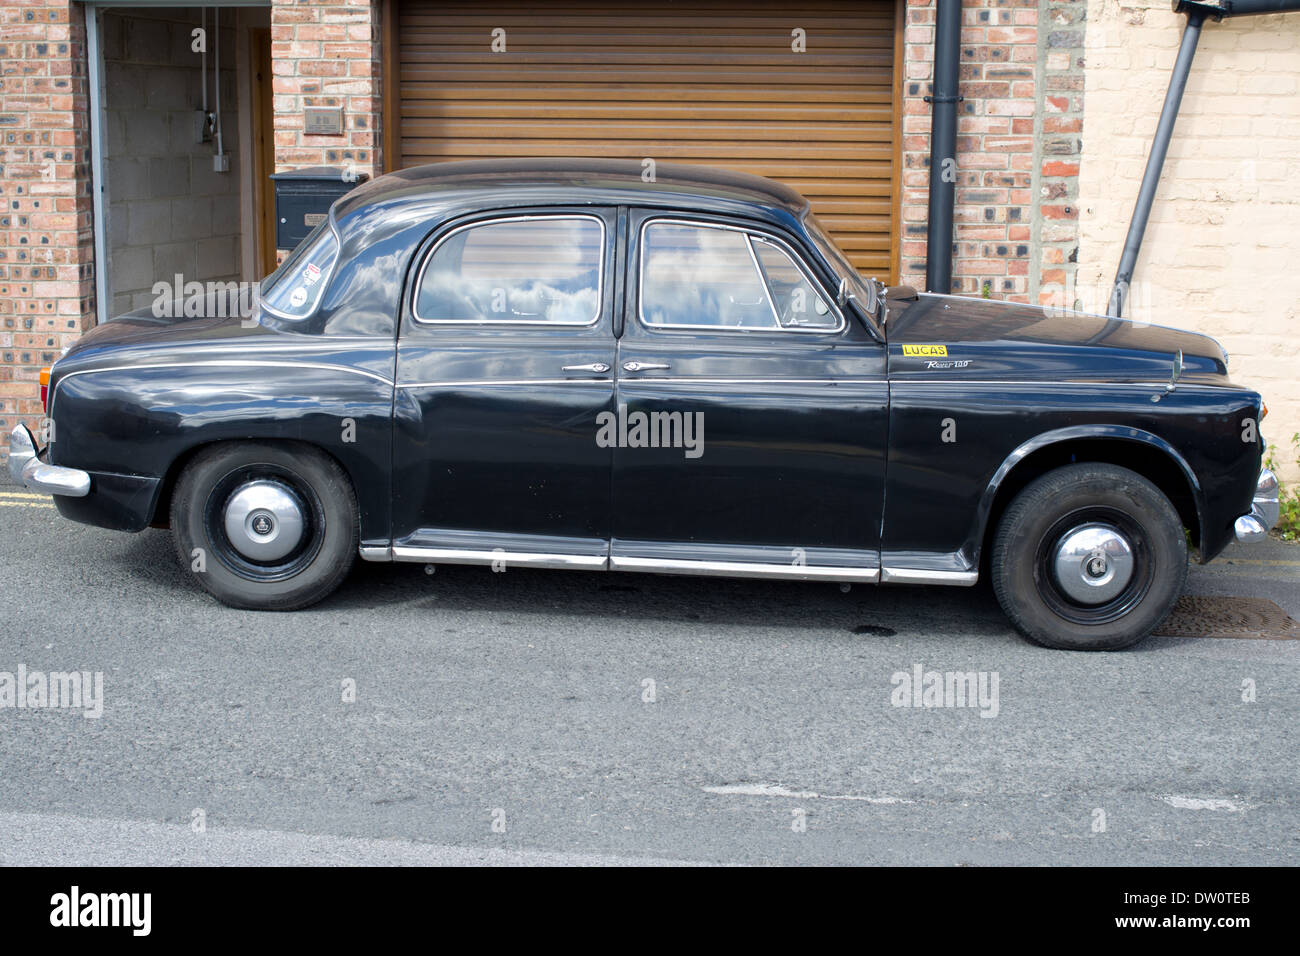 Black Rover 100 in good condition, classic British saloon, possibly in daily use. Stock Photo